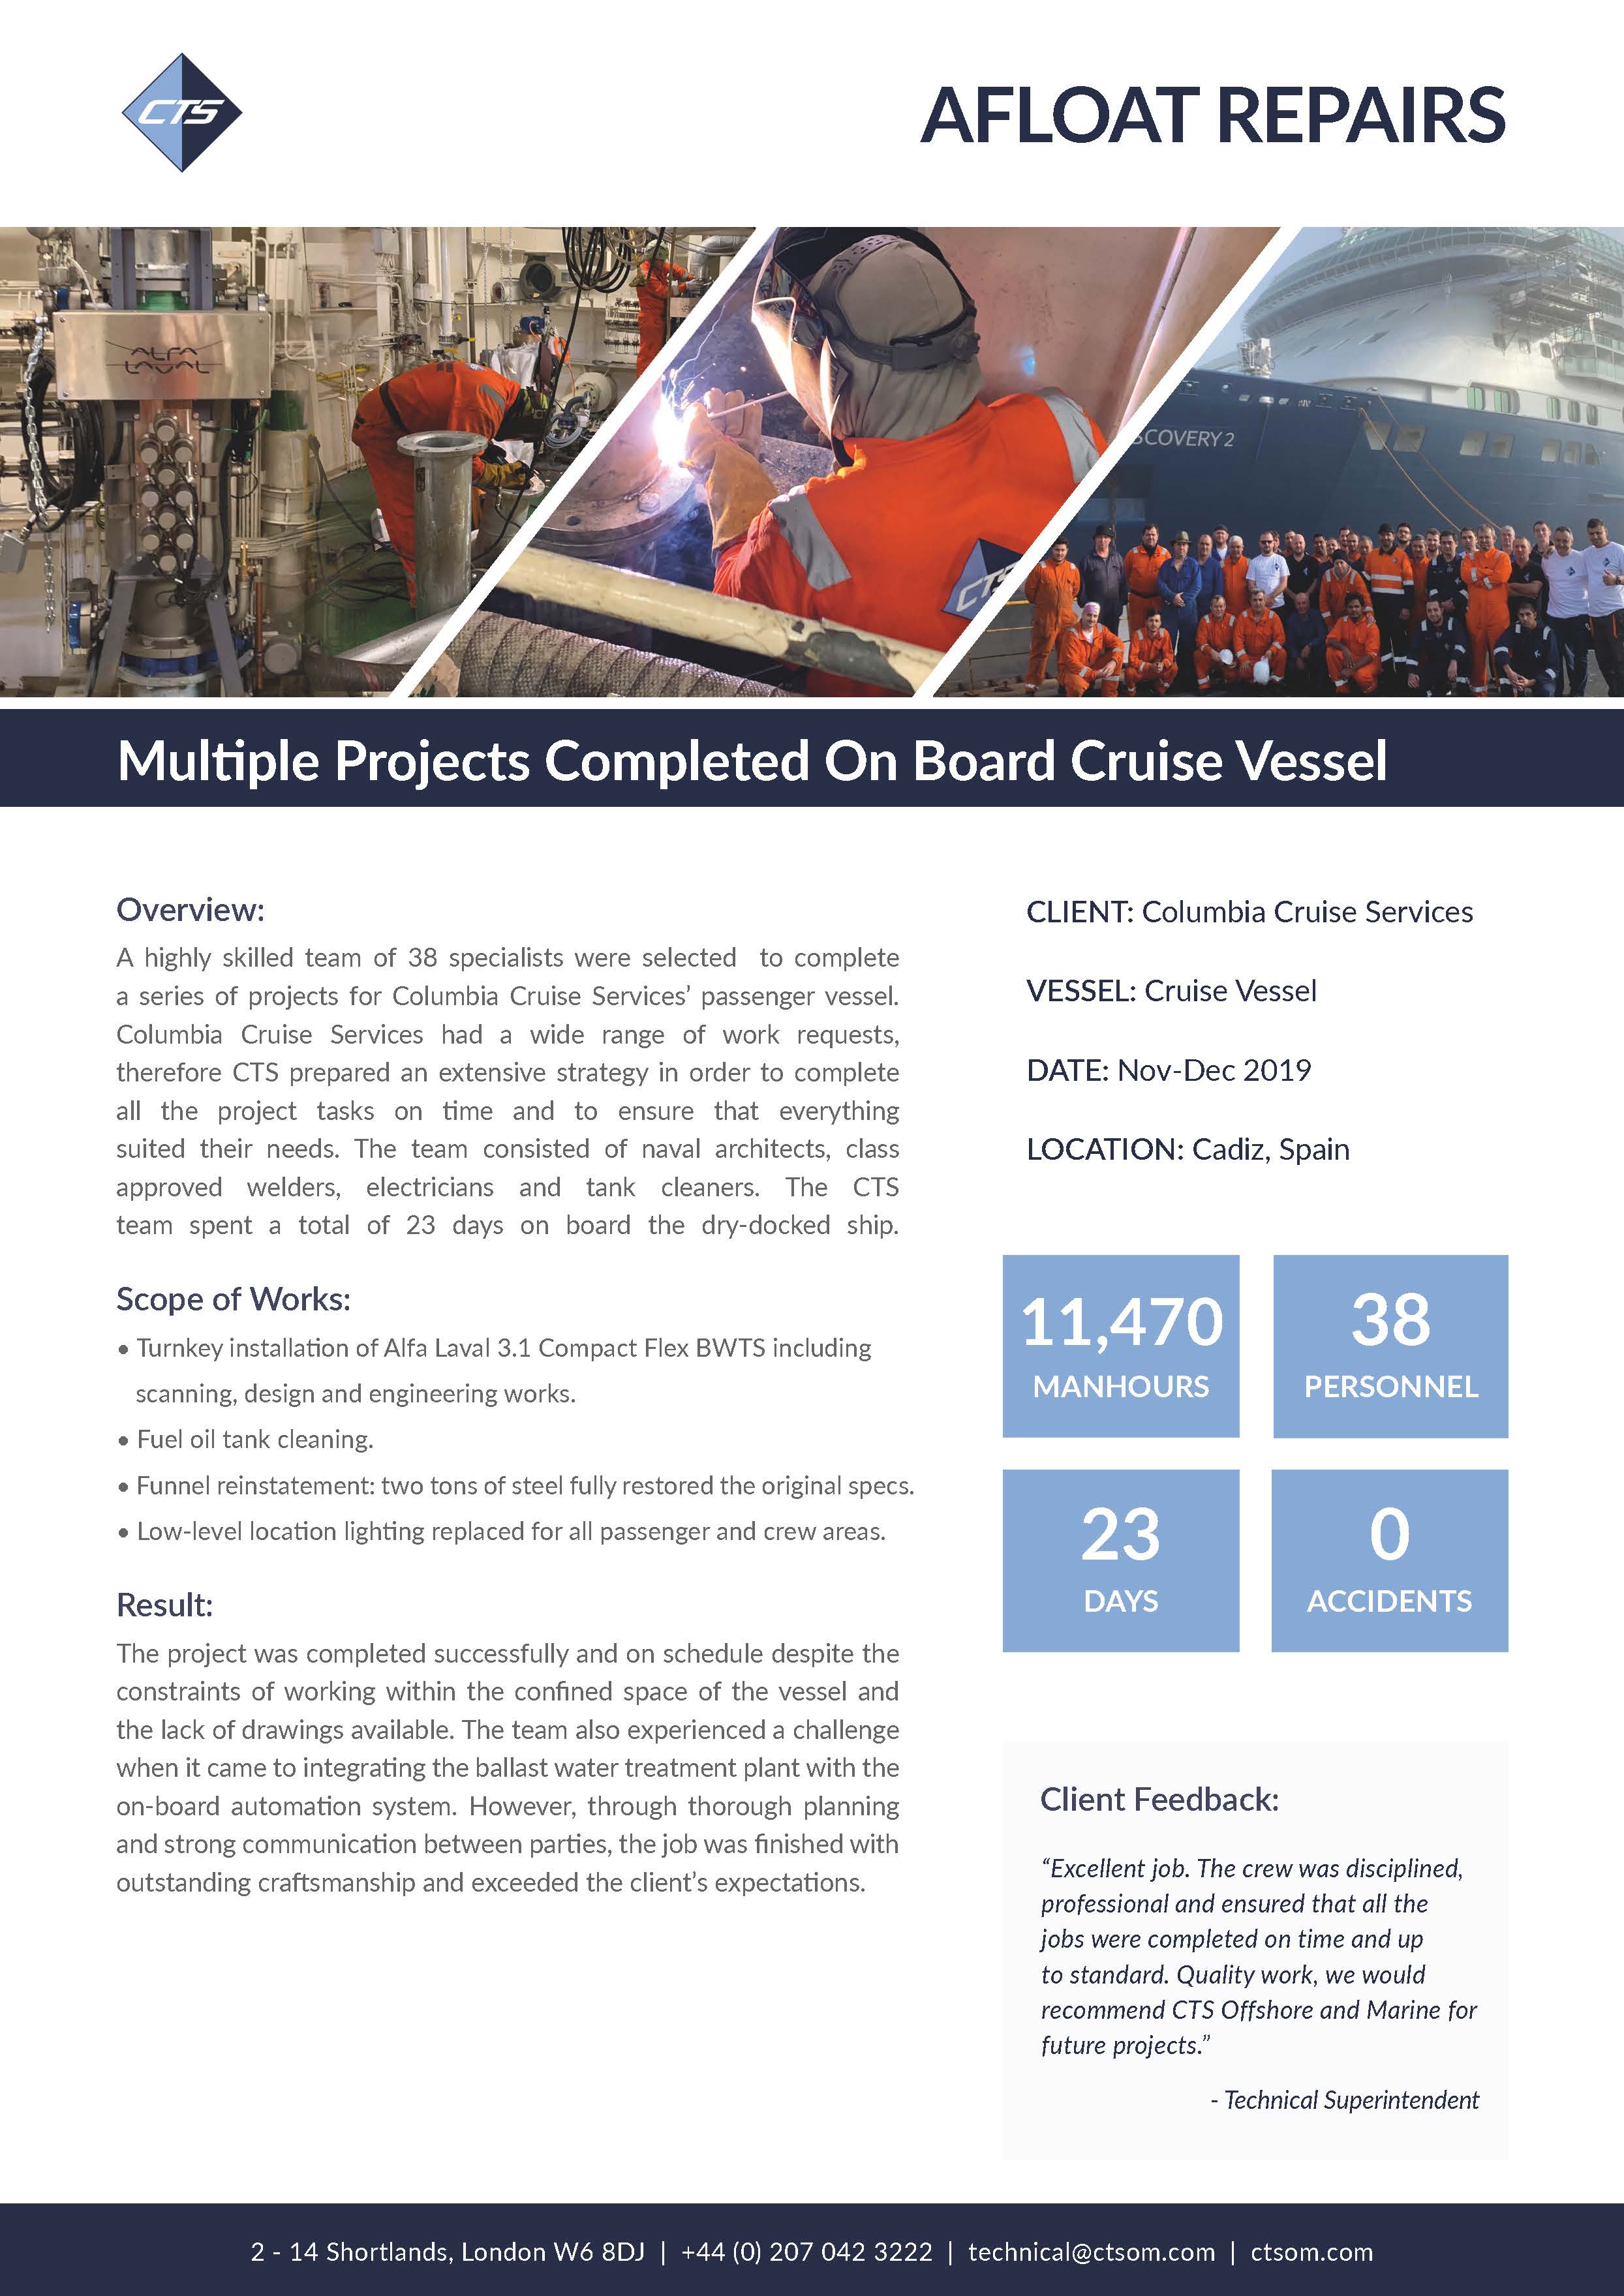 Multiple Projects Completed On Board Cruise Vessel